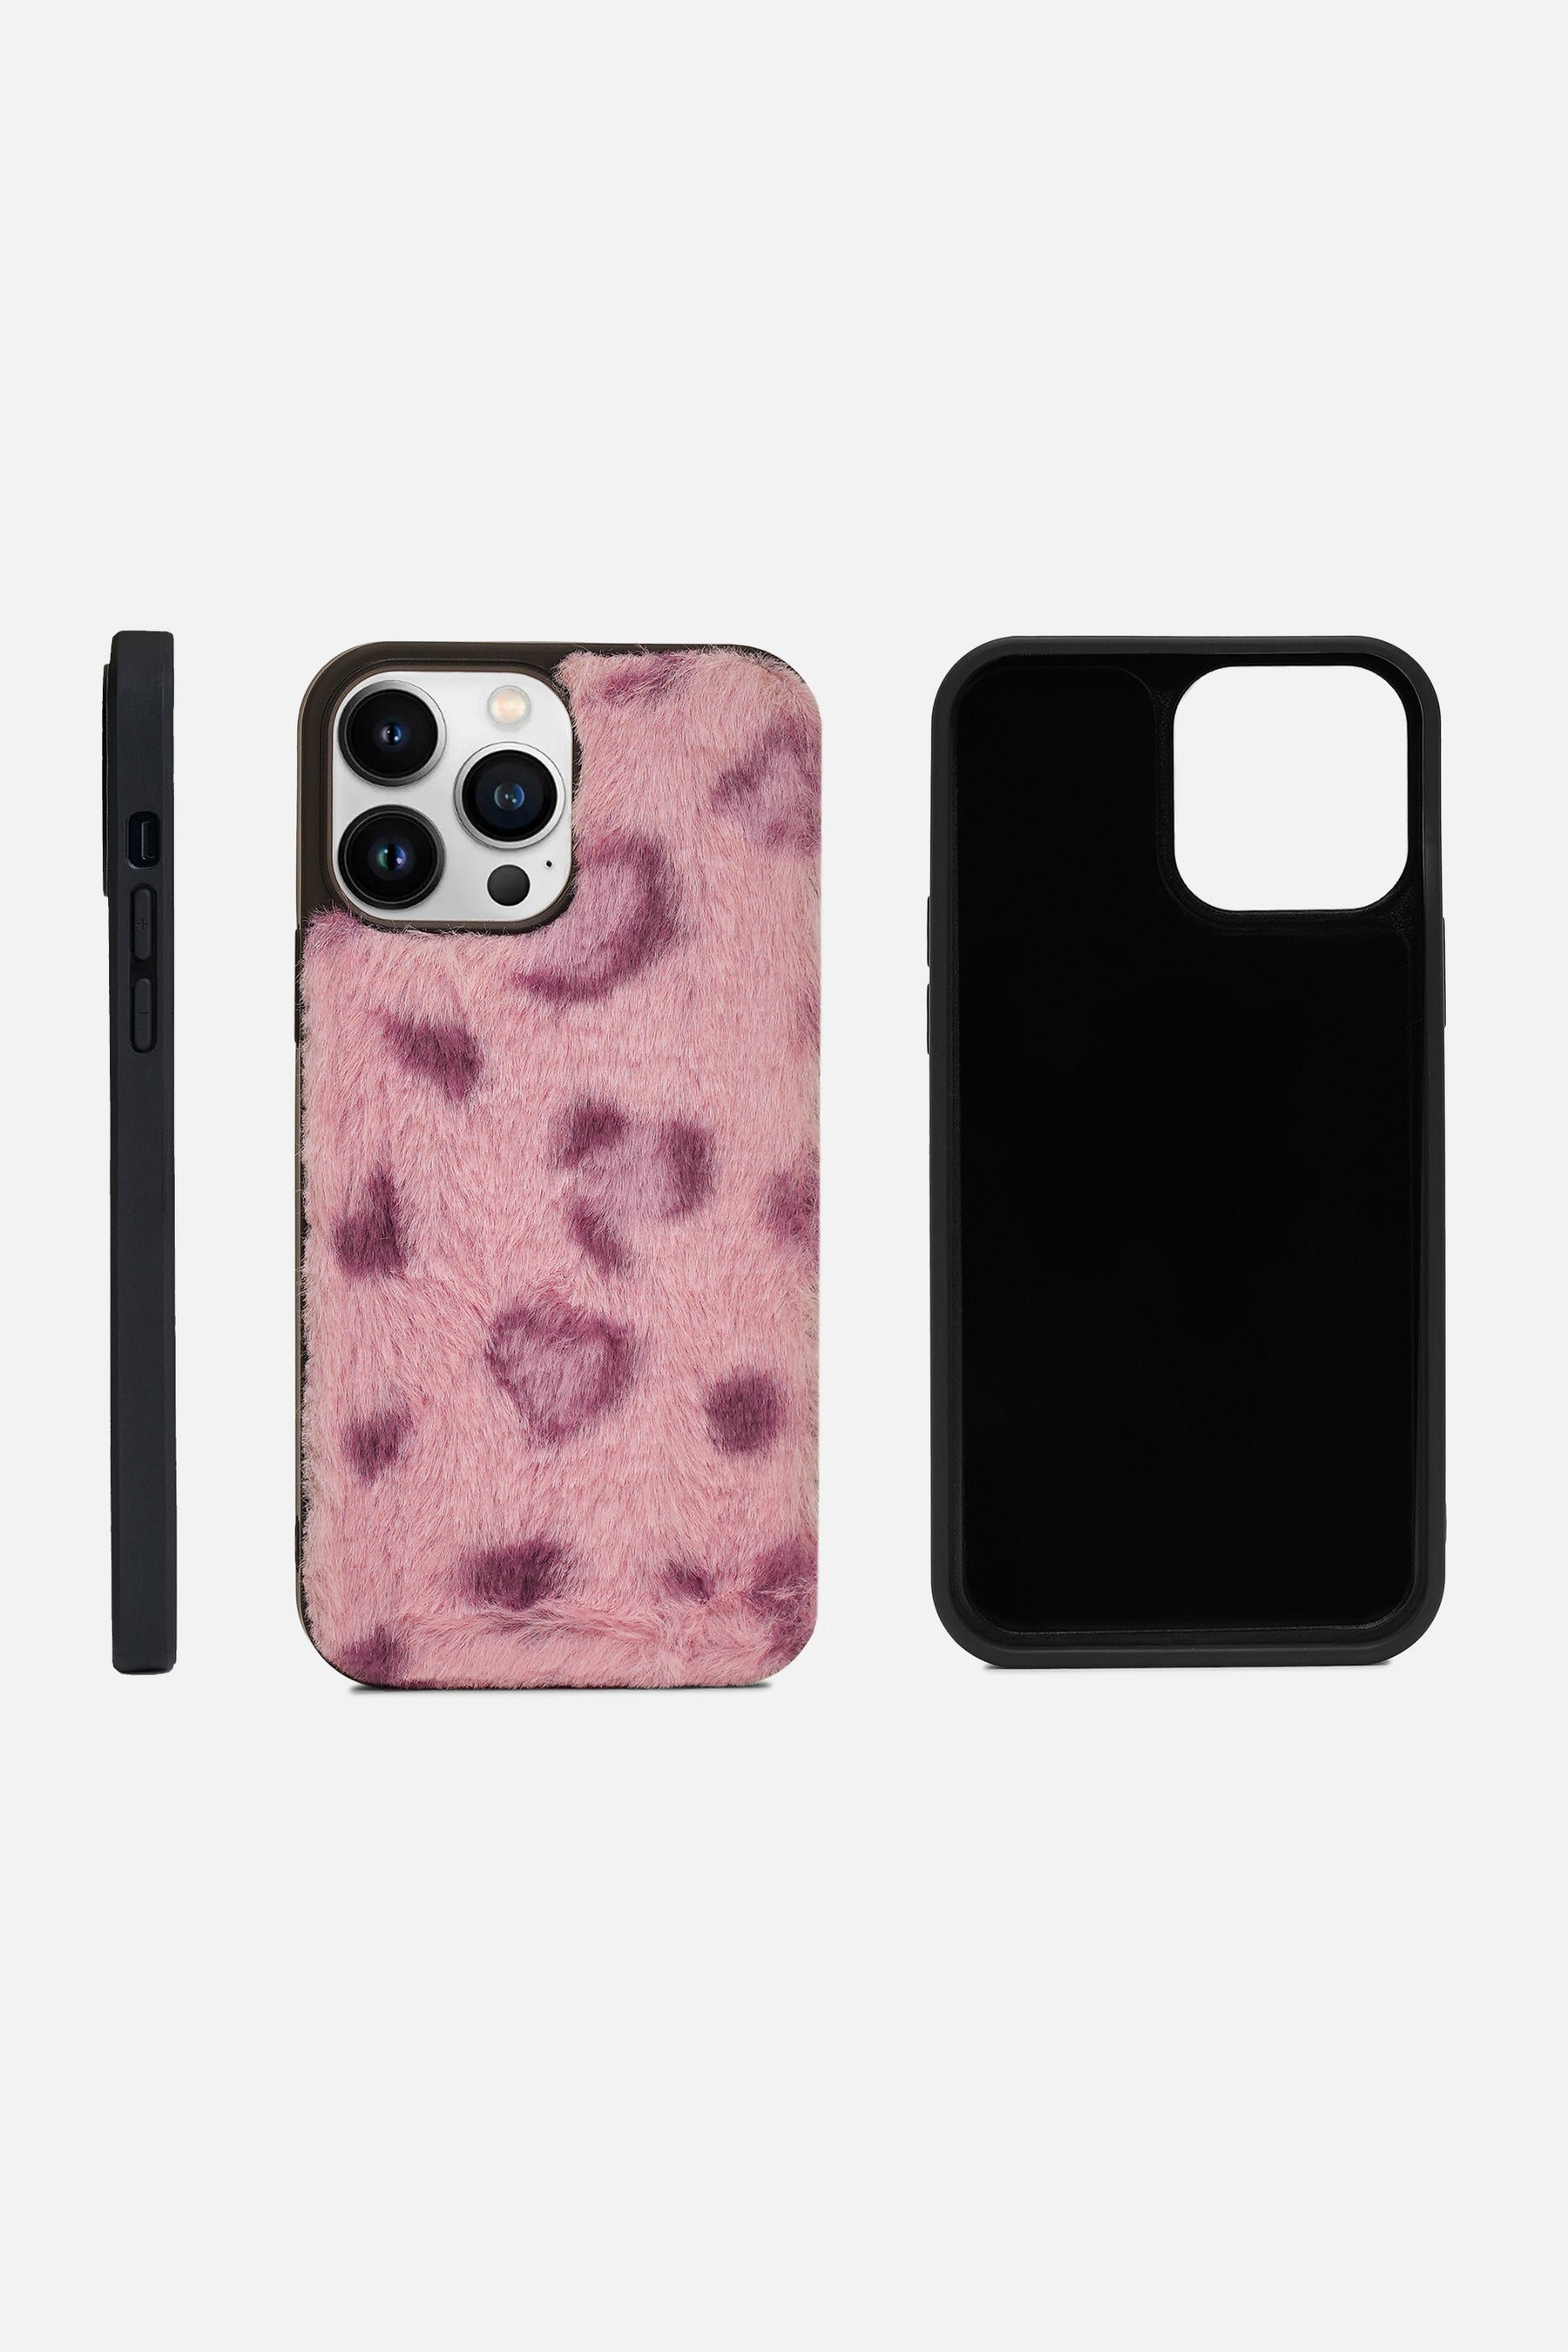 iPhone Printed Fur Case - Soft Red